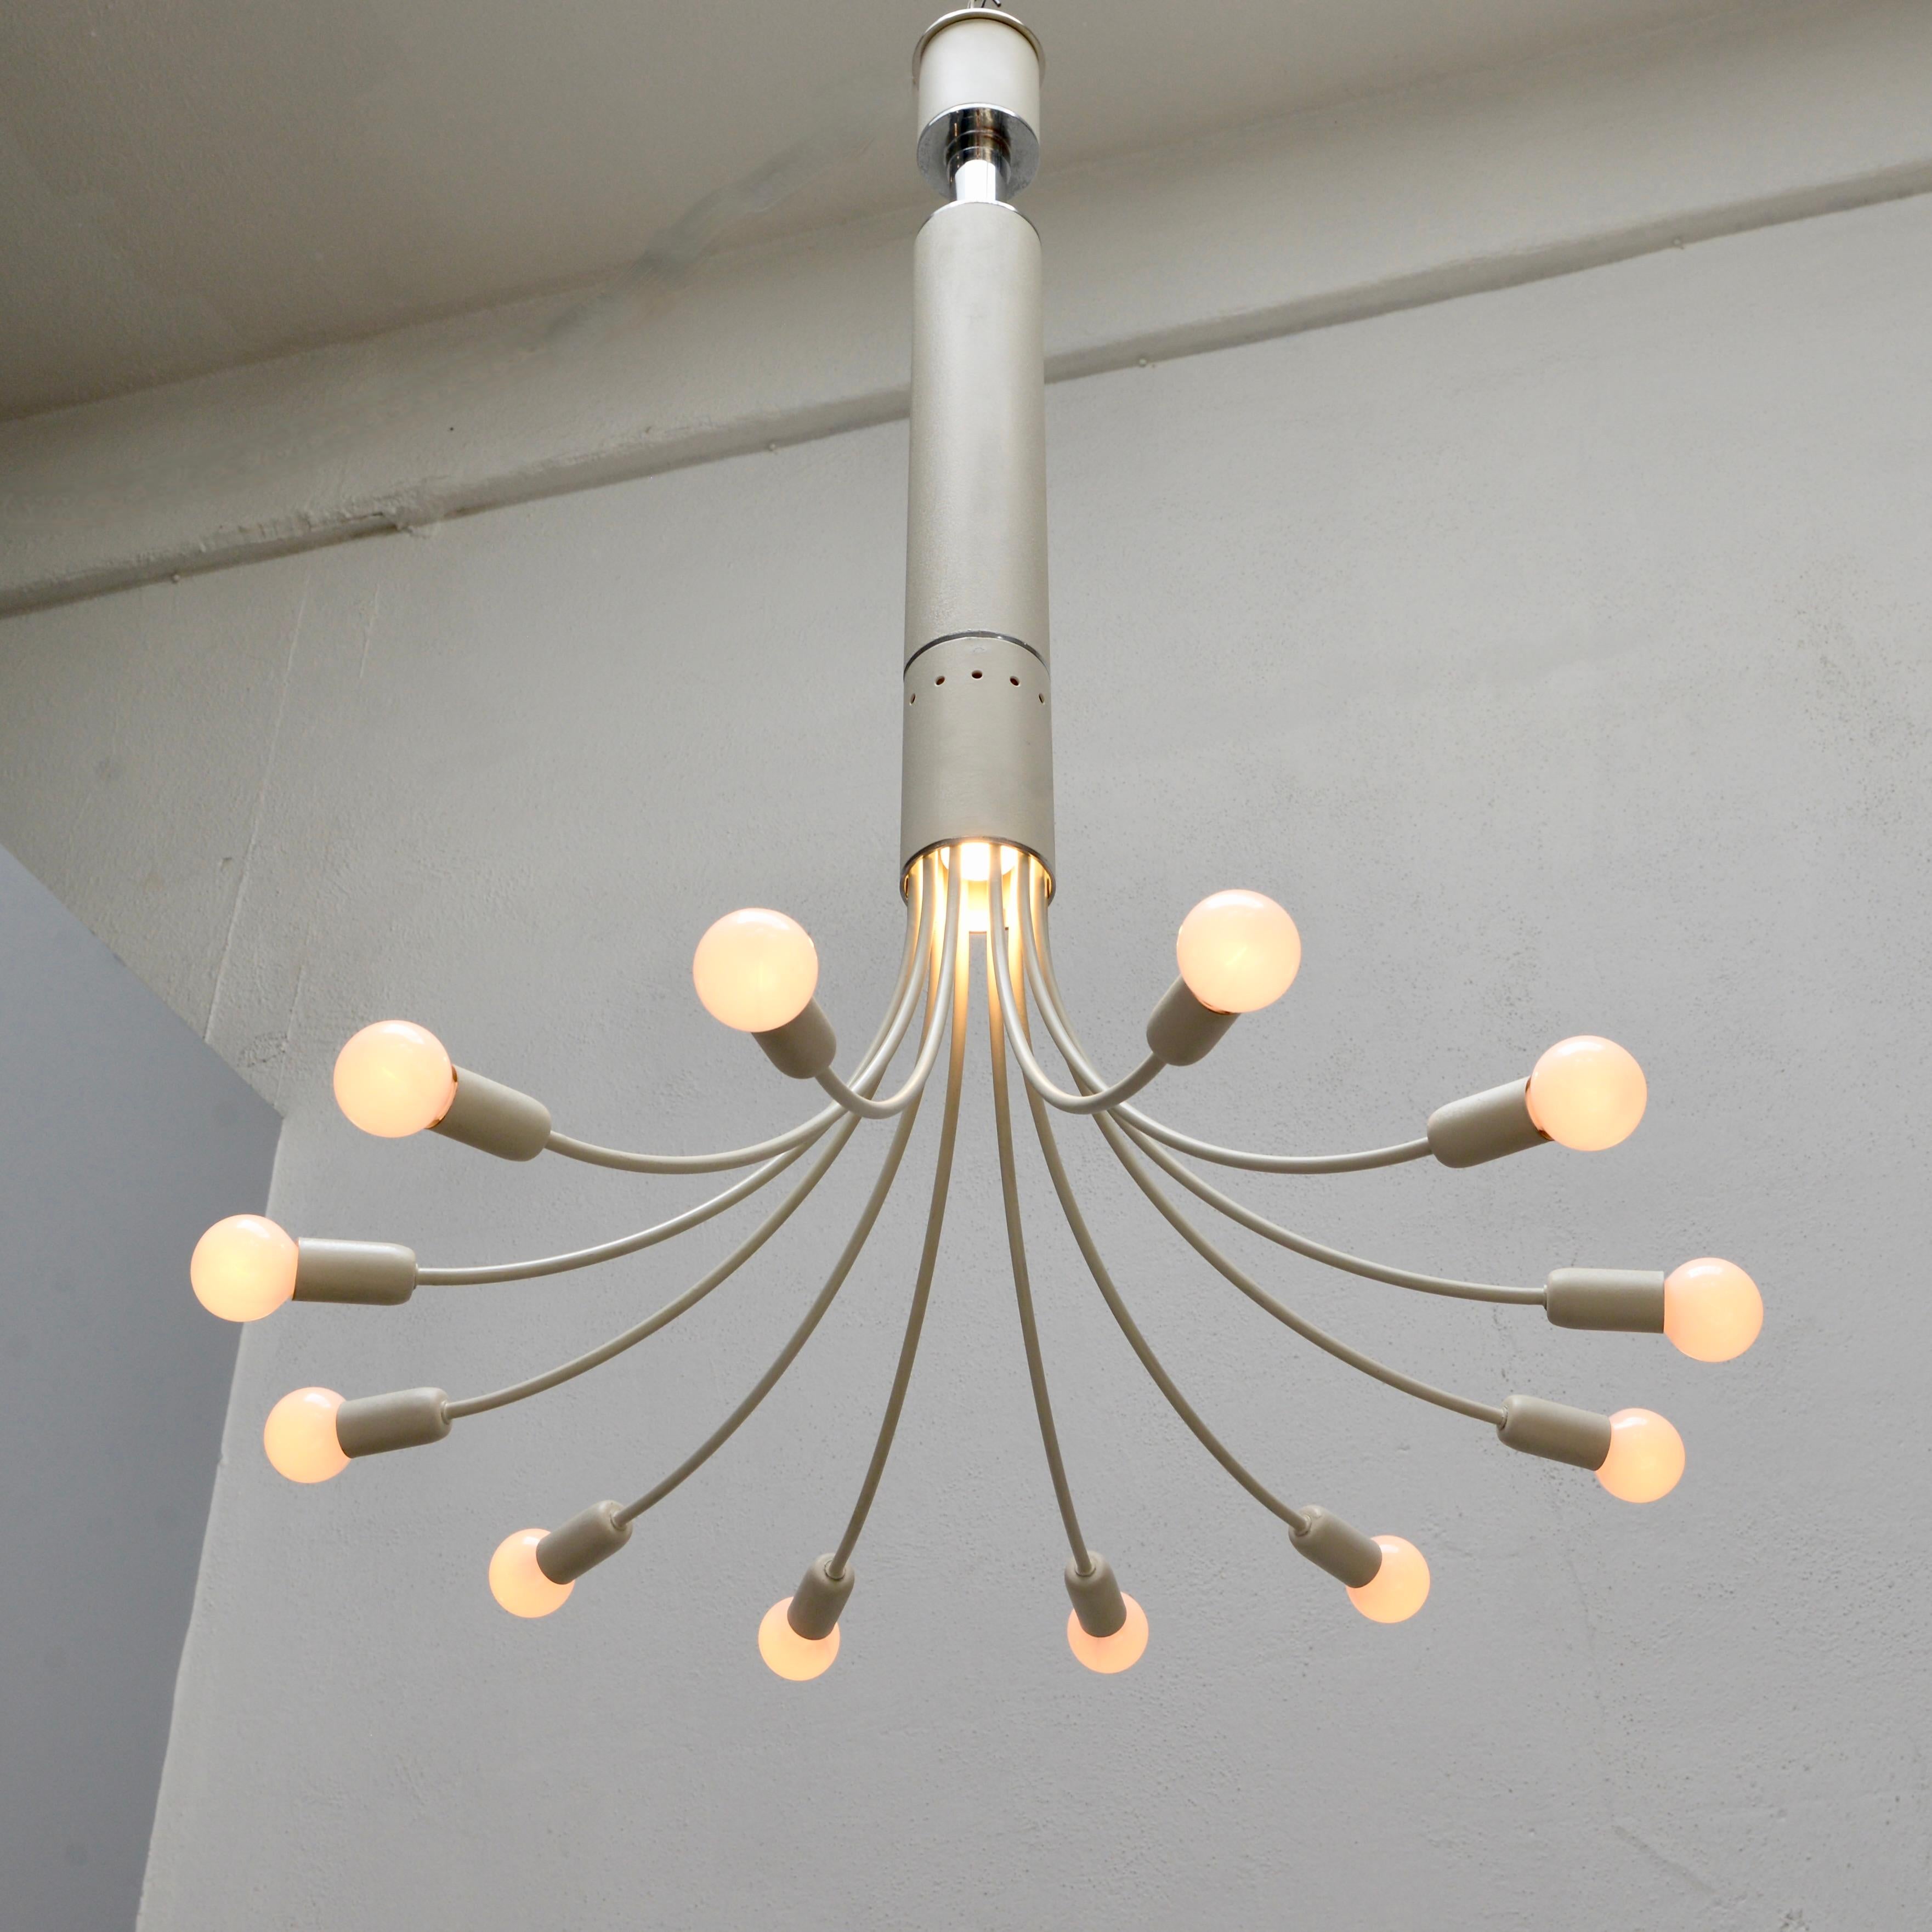 Angelo Brotto for Esperia Chandelier In Good Condition For Sale In Los Angeles, CA